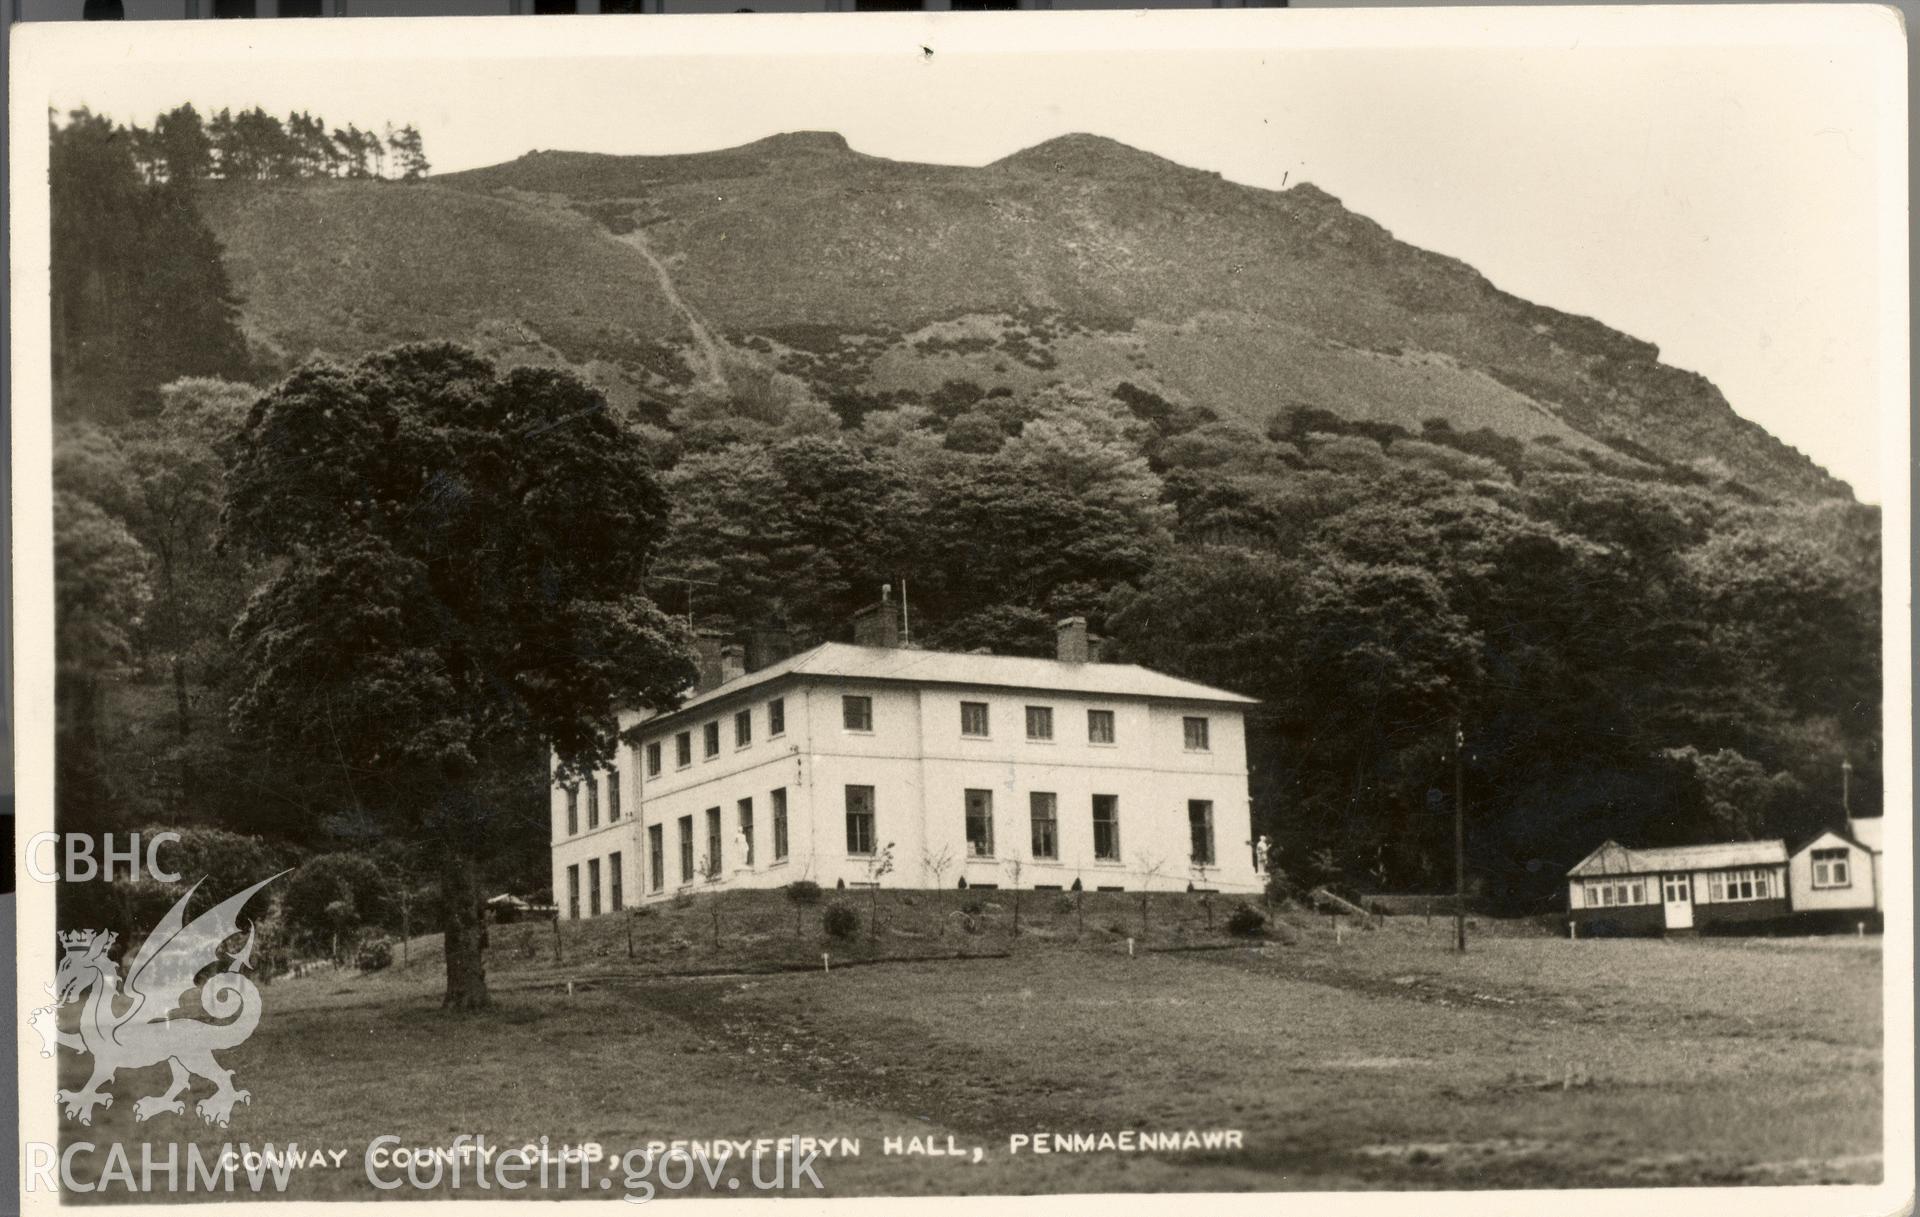 Digitised postcard image of Pendyffryn Hall, Penmaenmawr. Produced by Parks and Gardens Data Services, from an original item in the Peter Davis Collection at Parks and Gardens UK. We hold only web-resolution images of this collection, suitable for viewing on screen and for research purposes only. We do not hold the original images, or publication quality scans.